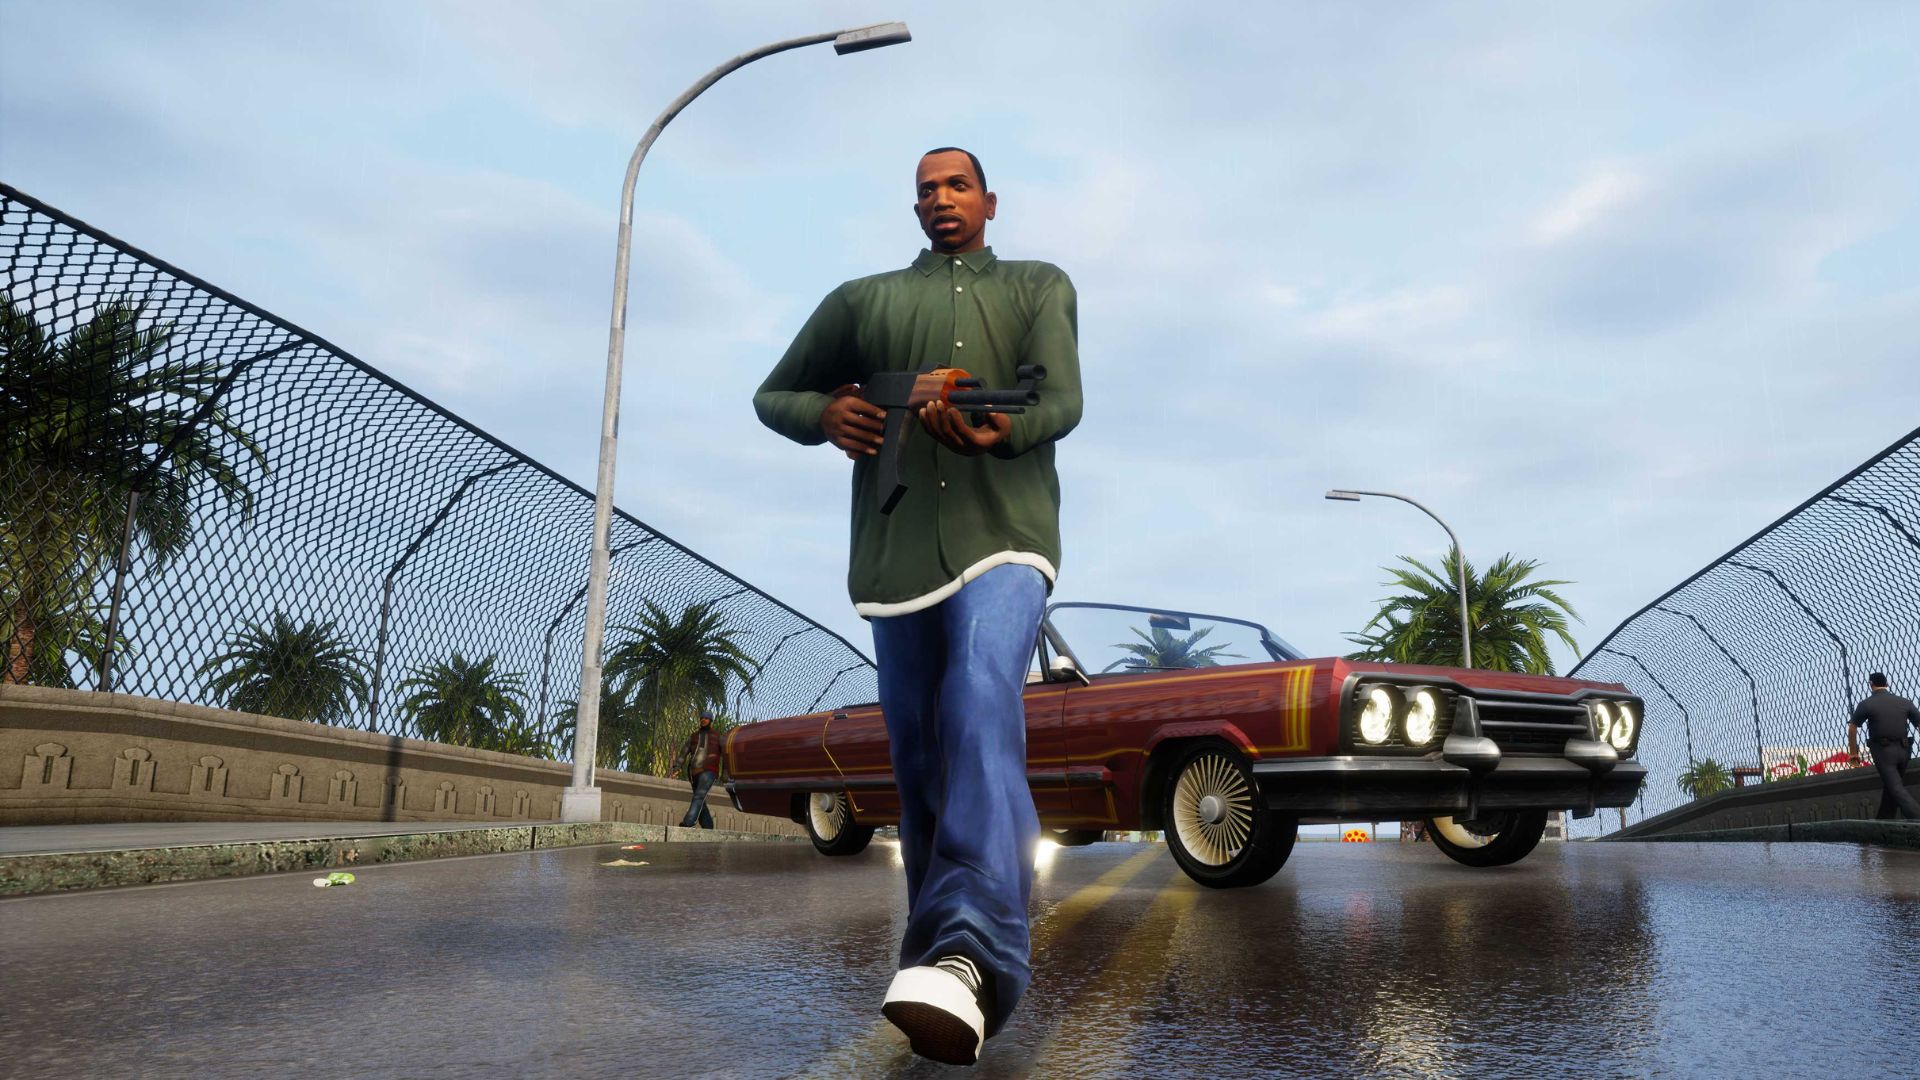 How Much Will GTA 6 Cost & Which Edition Will You Buy? 